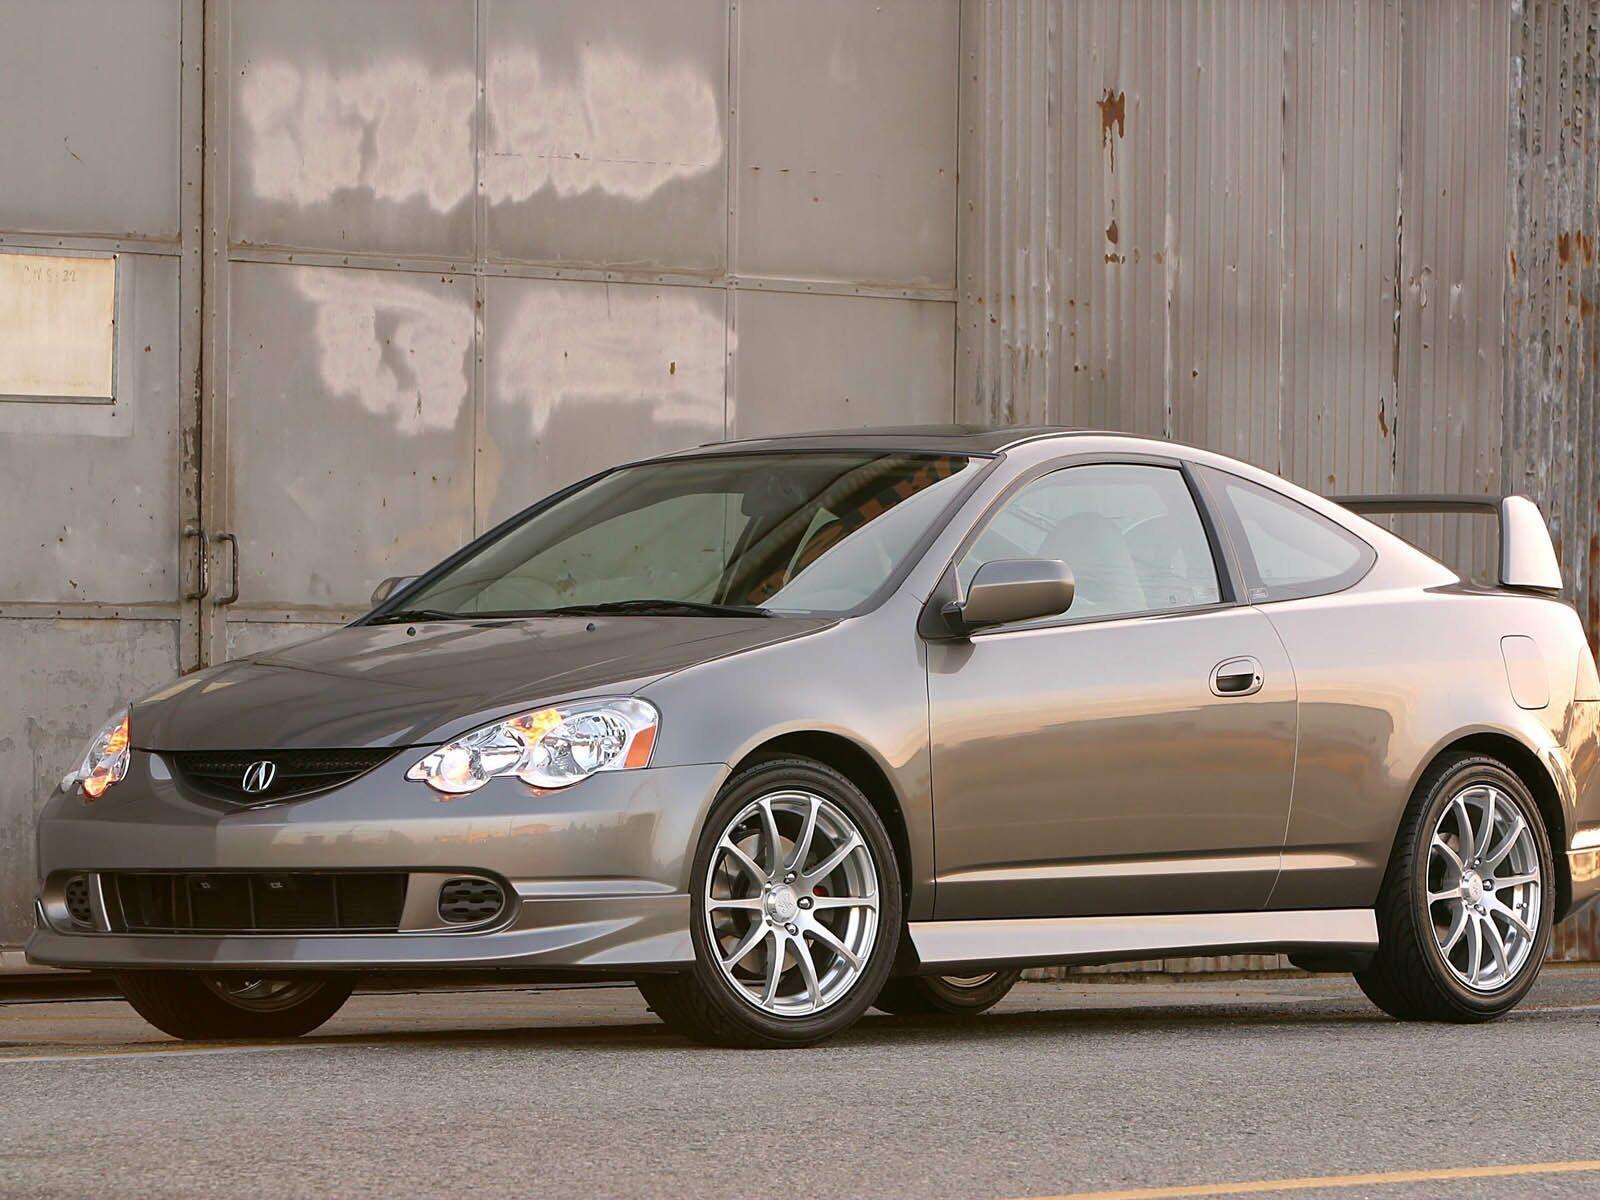 Download Acura Rsx HD Background Wallpaper 43 HD Wallpaper Full Size